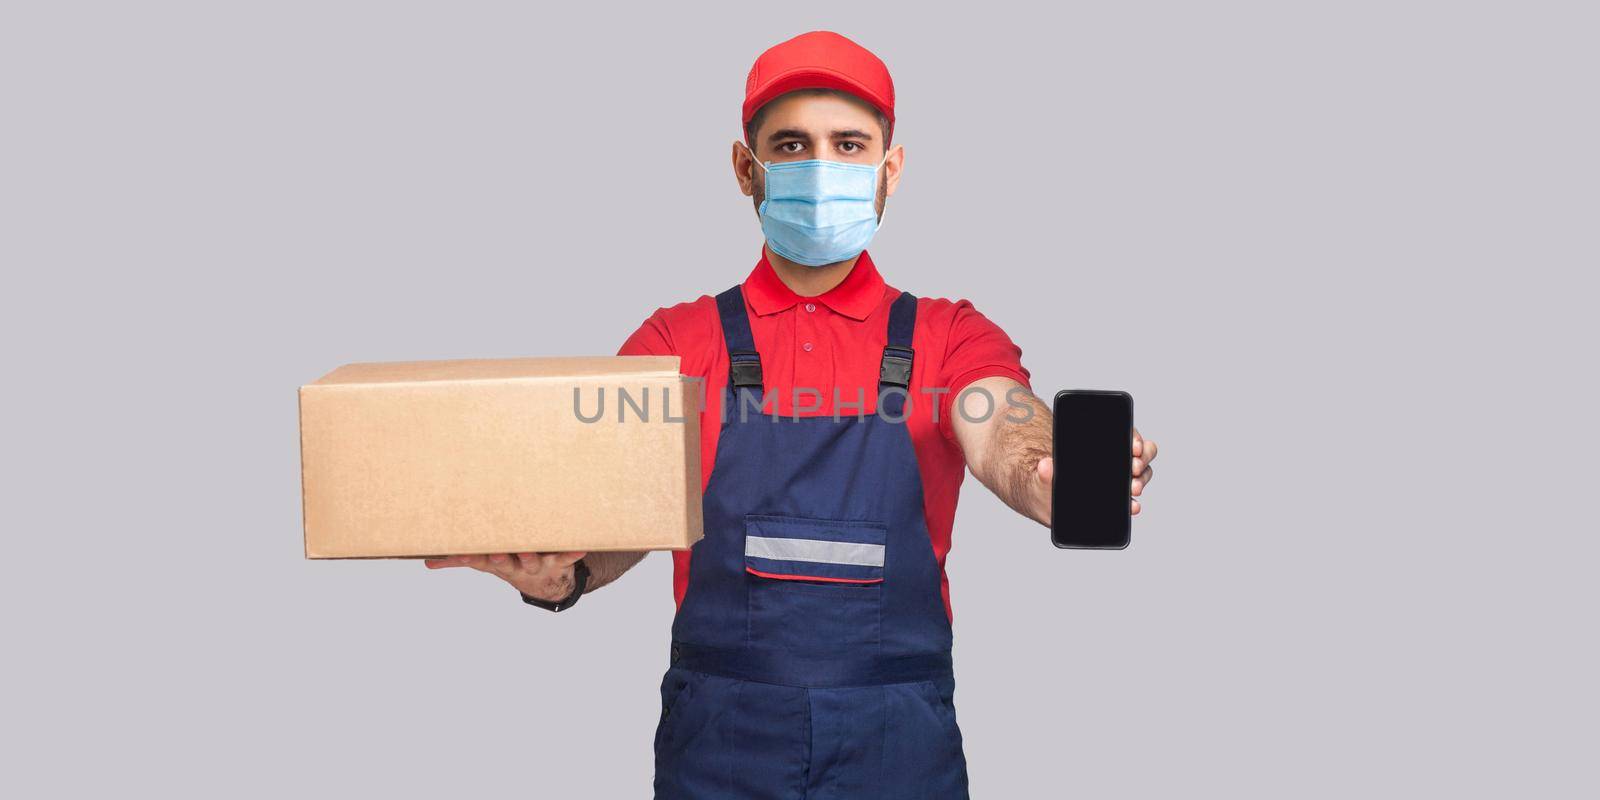 Delivery on quarantine. This is For you! Young man with surgical medical mask in blue uniform and red t-shirt standing, holding cardboard box and showing smart phone display on grey background.